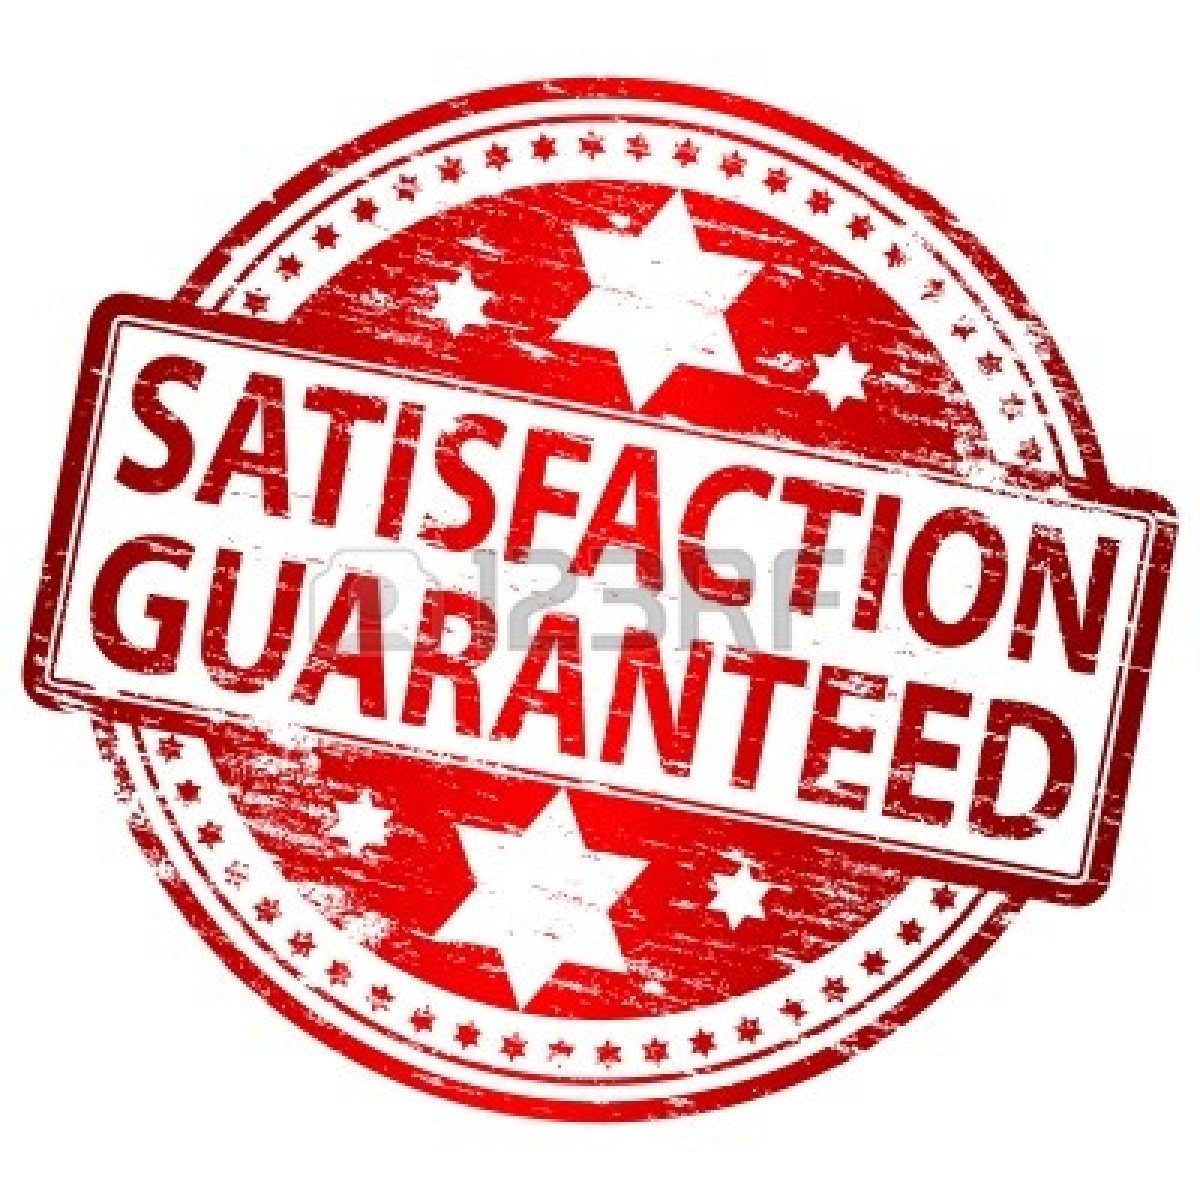 8986328 satisfaction guaranteed rubber stamp 3f073250 4253 4aa3 81a6 8170042448d6